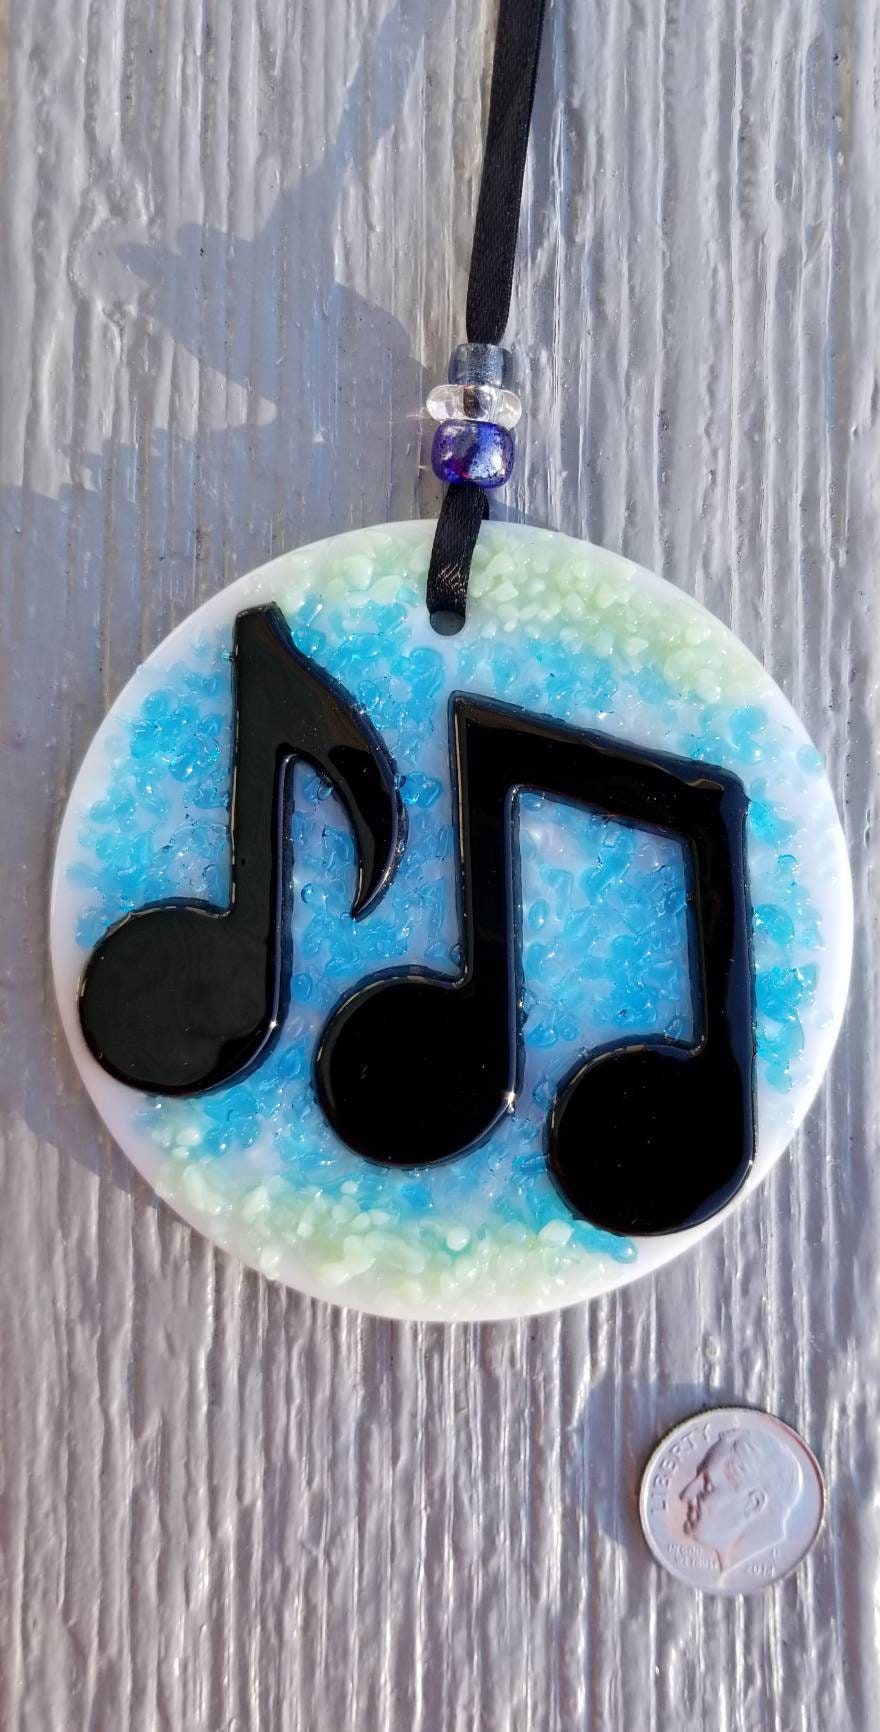 Musical Notes Suncatcher, Fused Glass Ornament. Blue, Green Crushed Glass is kiln fired to a glossy sheen. Music Teacher gift, thank you.